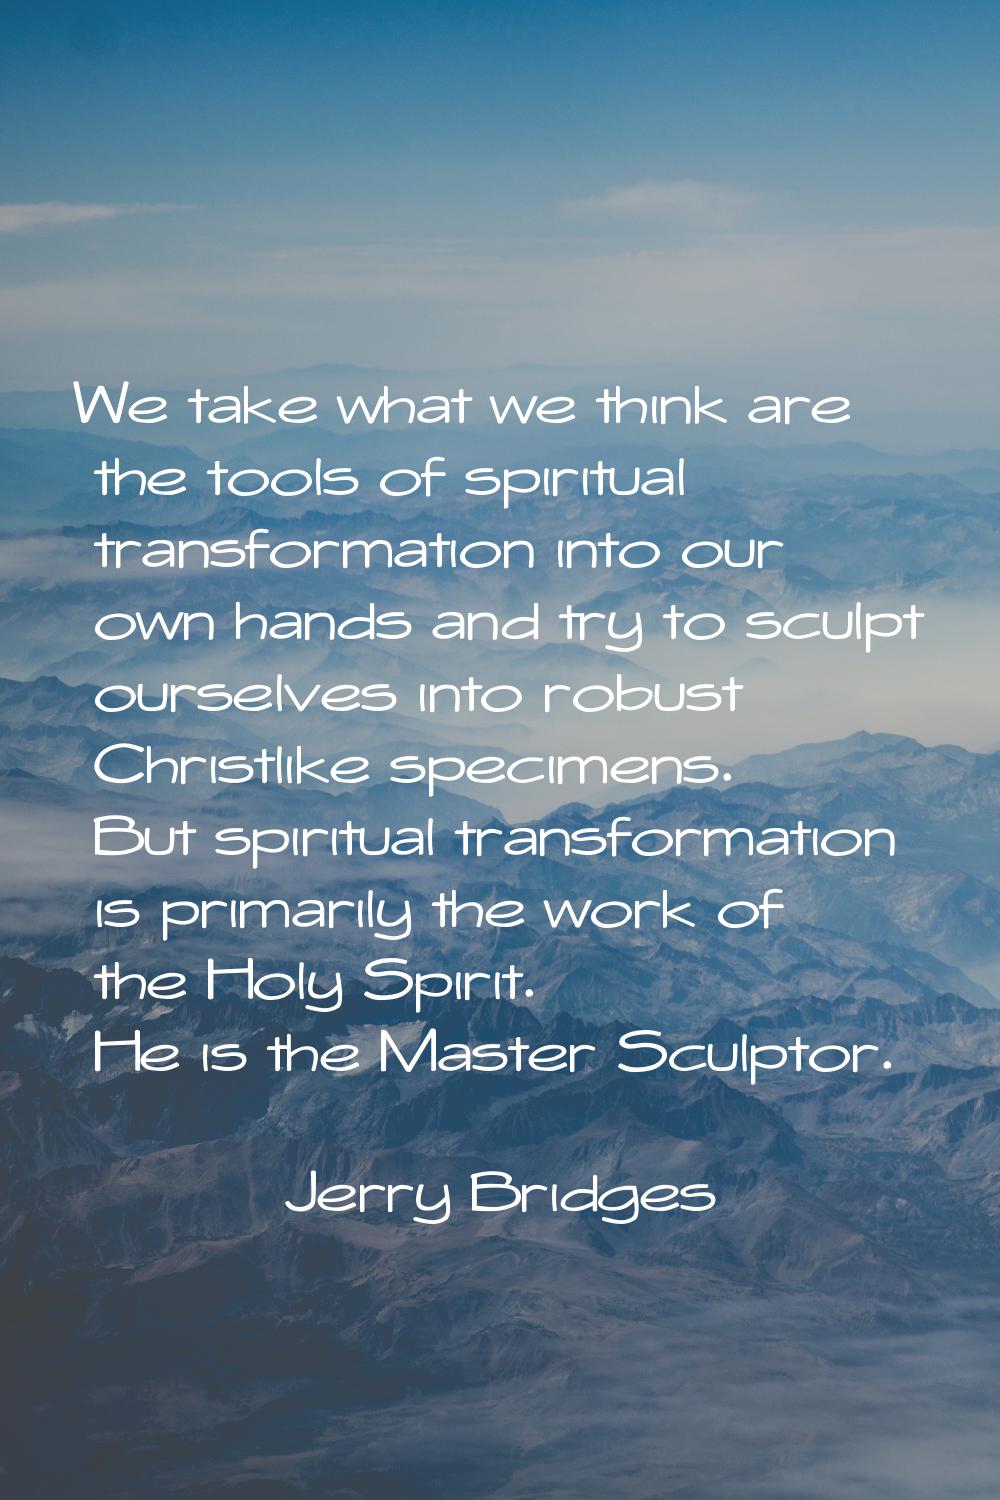 We take what we think are the tools of spiritual transformation into our own hands and try to sculp